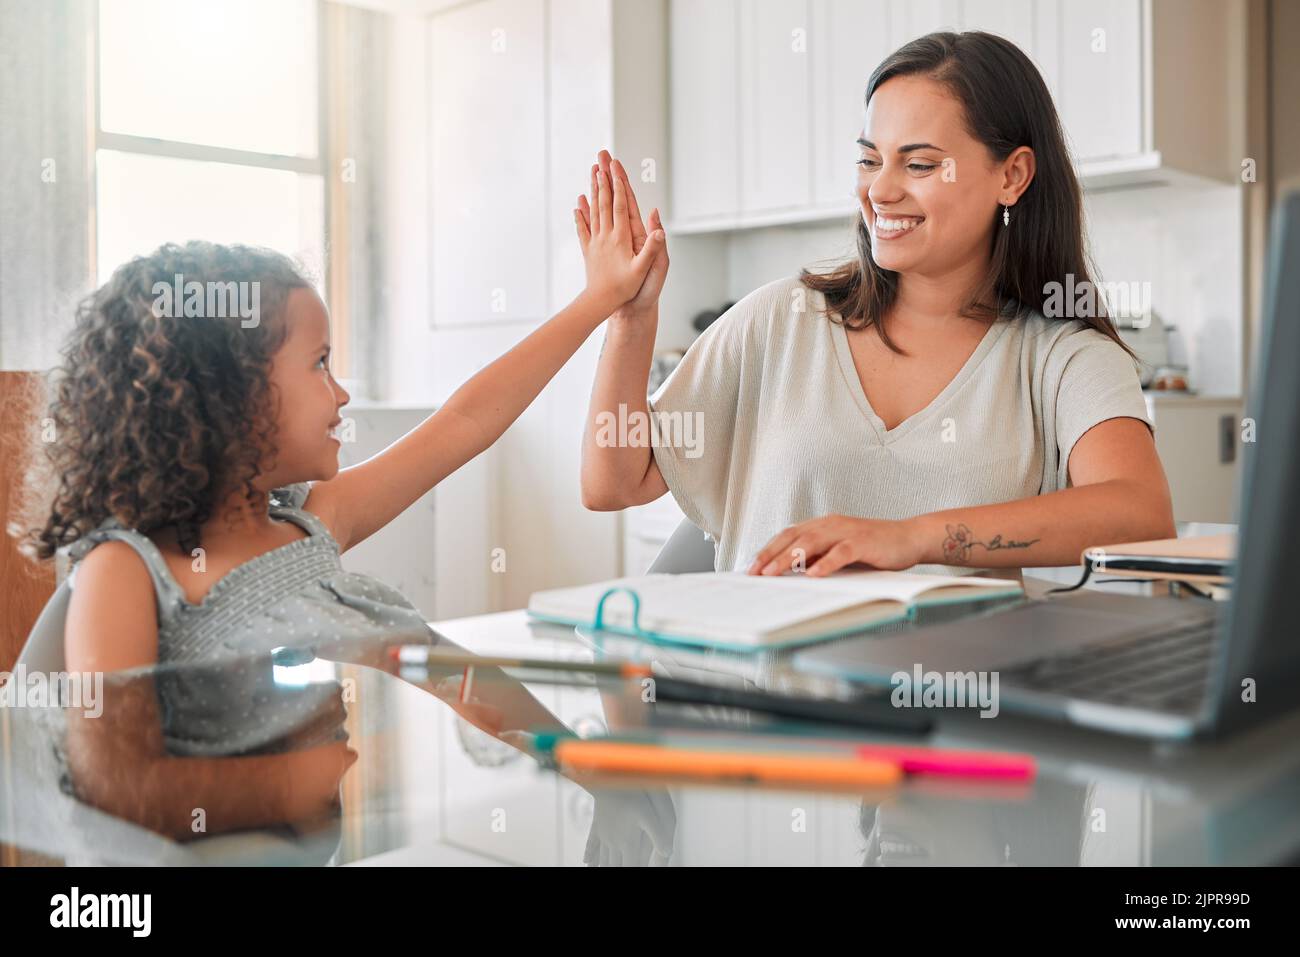 High five, homework and mom celebrating with preschool student for learning, goals and writing notes successfully. Teamwork, smile, and happy mom Stock Photo